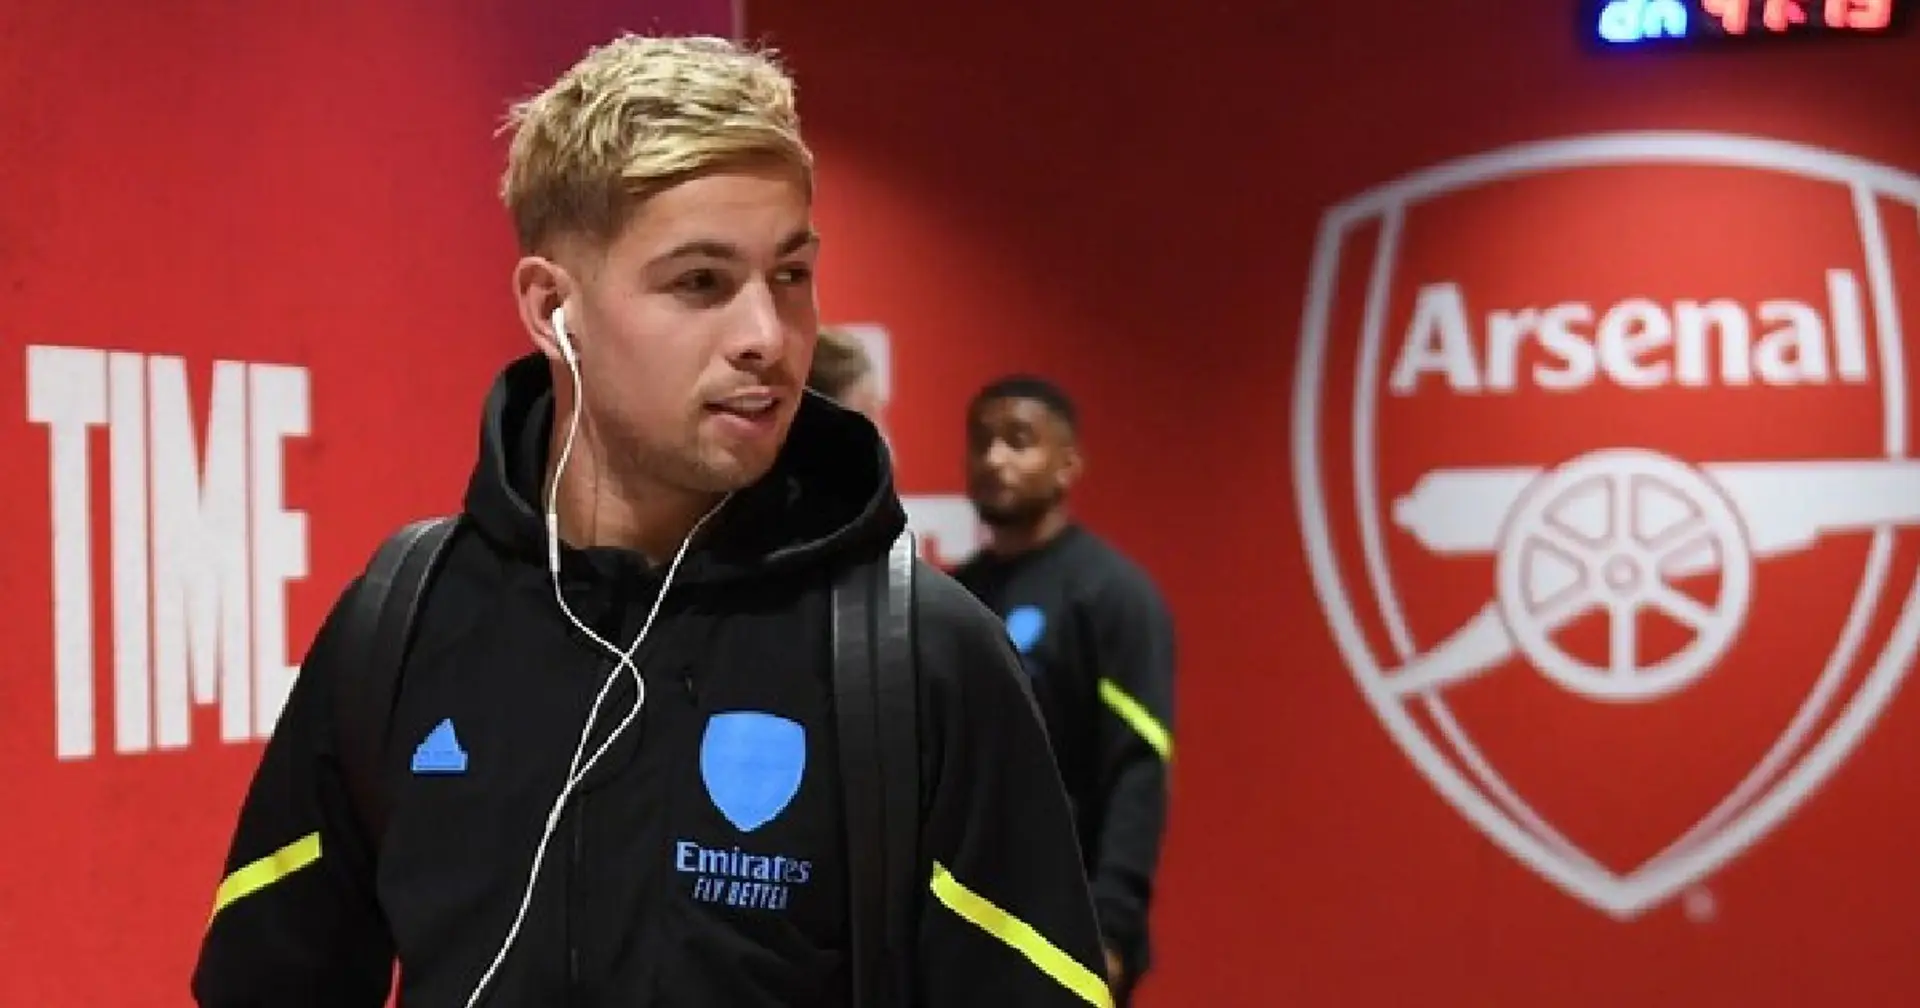 'I am stronger now': Smith Rowe reveals who helped him through injury phase